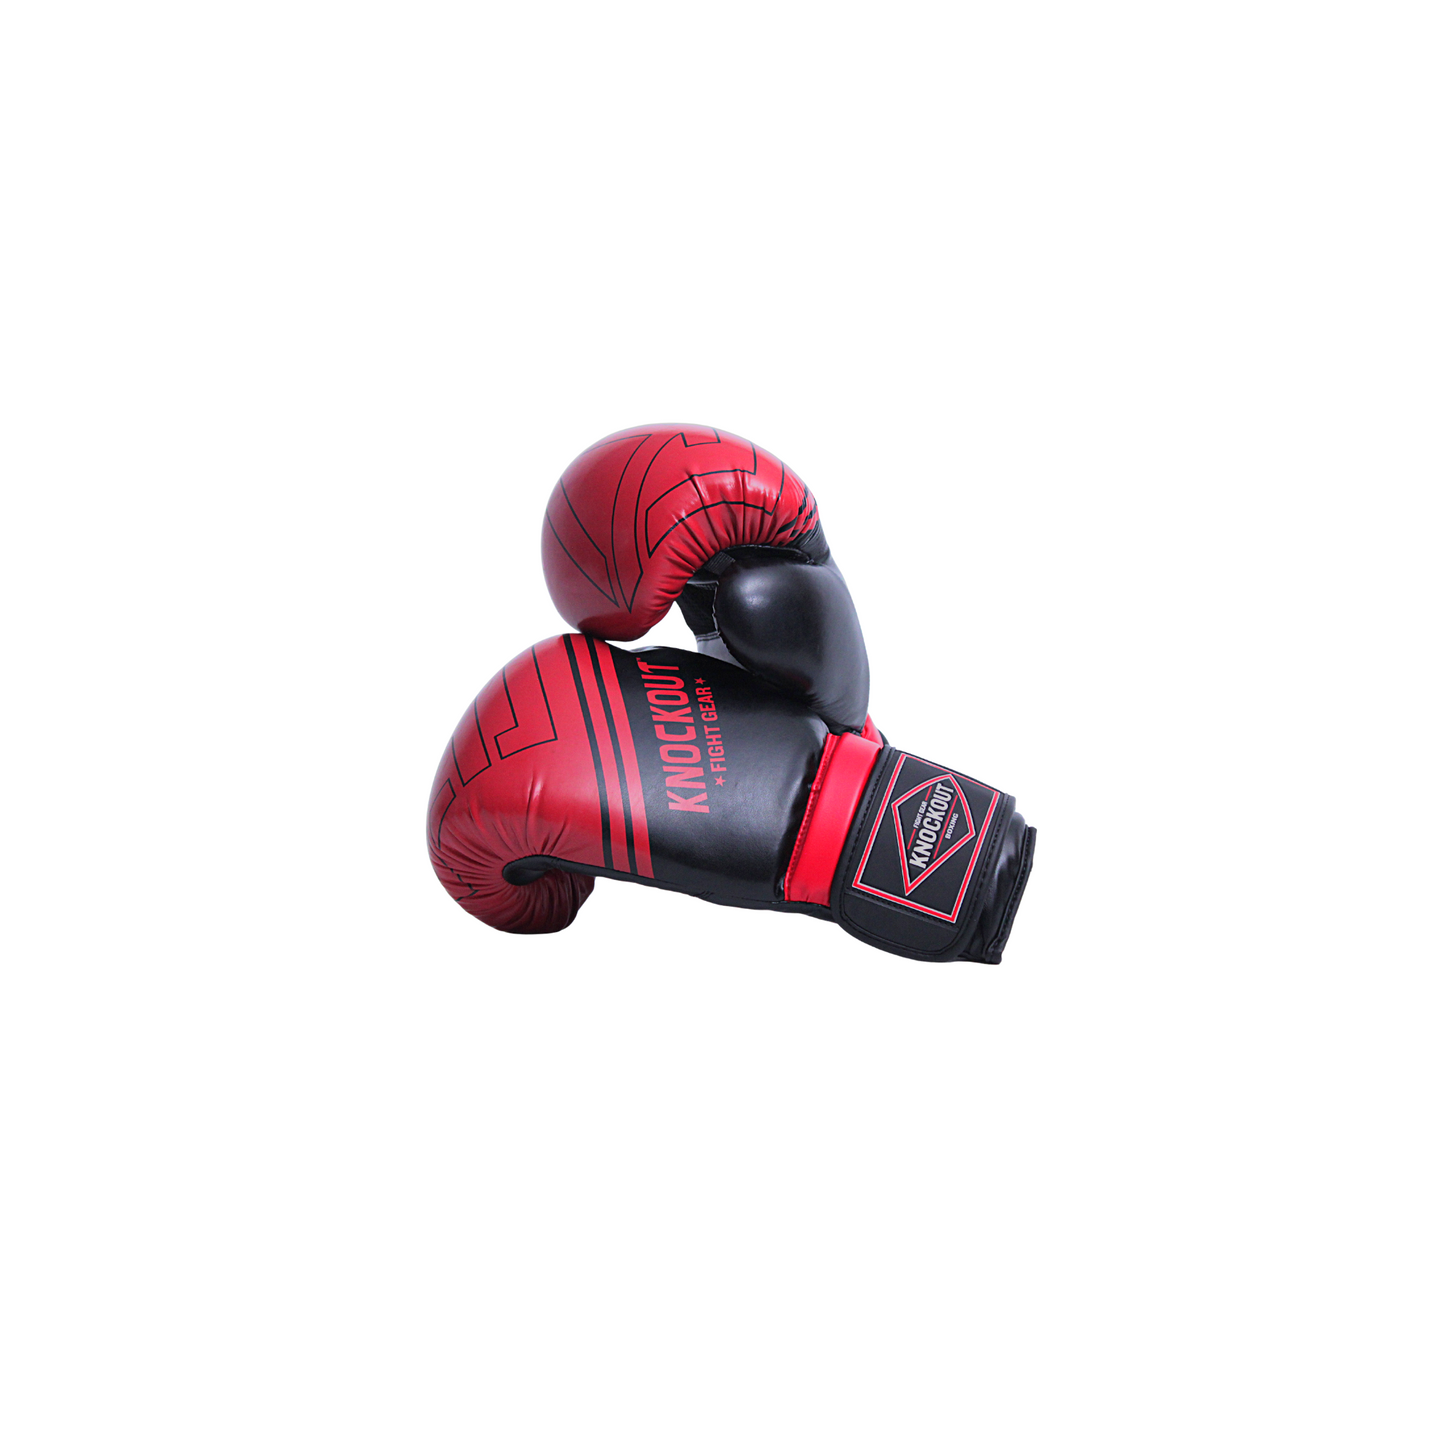 Boxing Gloves for Men Women, Muay Thai MMA Kickboxing Home Gym Training, Sparing Gloves Pair with Premium Mesh Palm